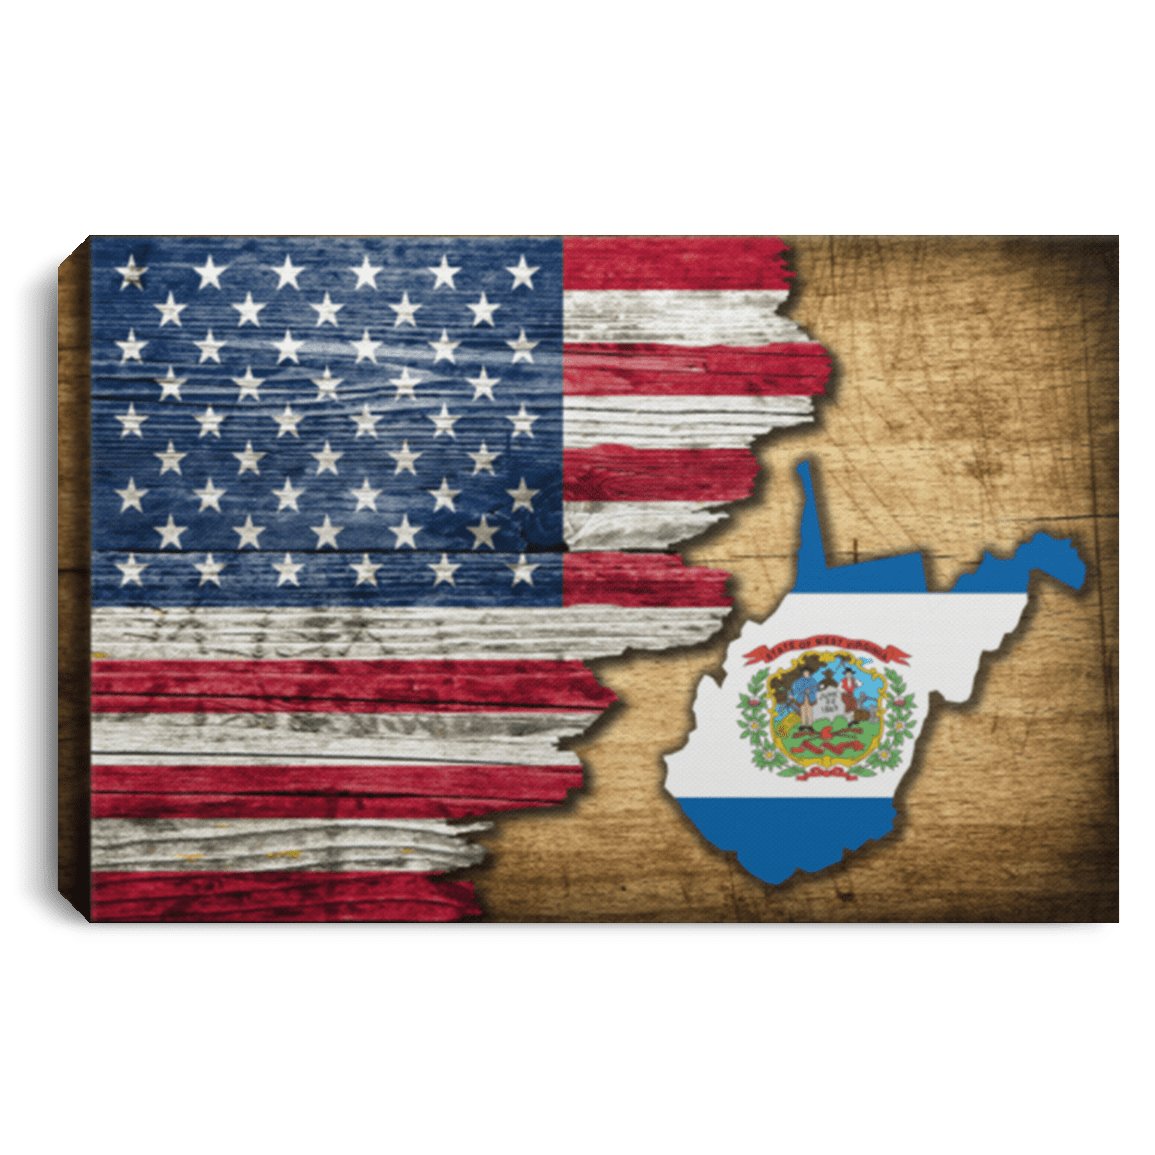 United States/West Virginia Flag Ripped Effect 12X8 Inches Landscape Canvas .75In Frame